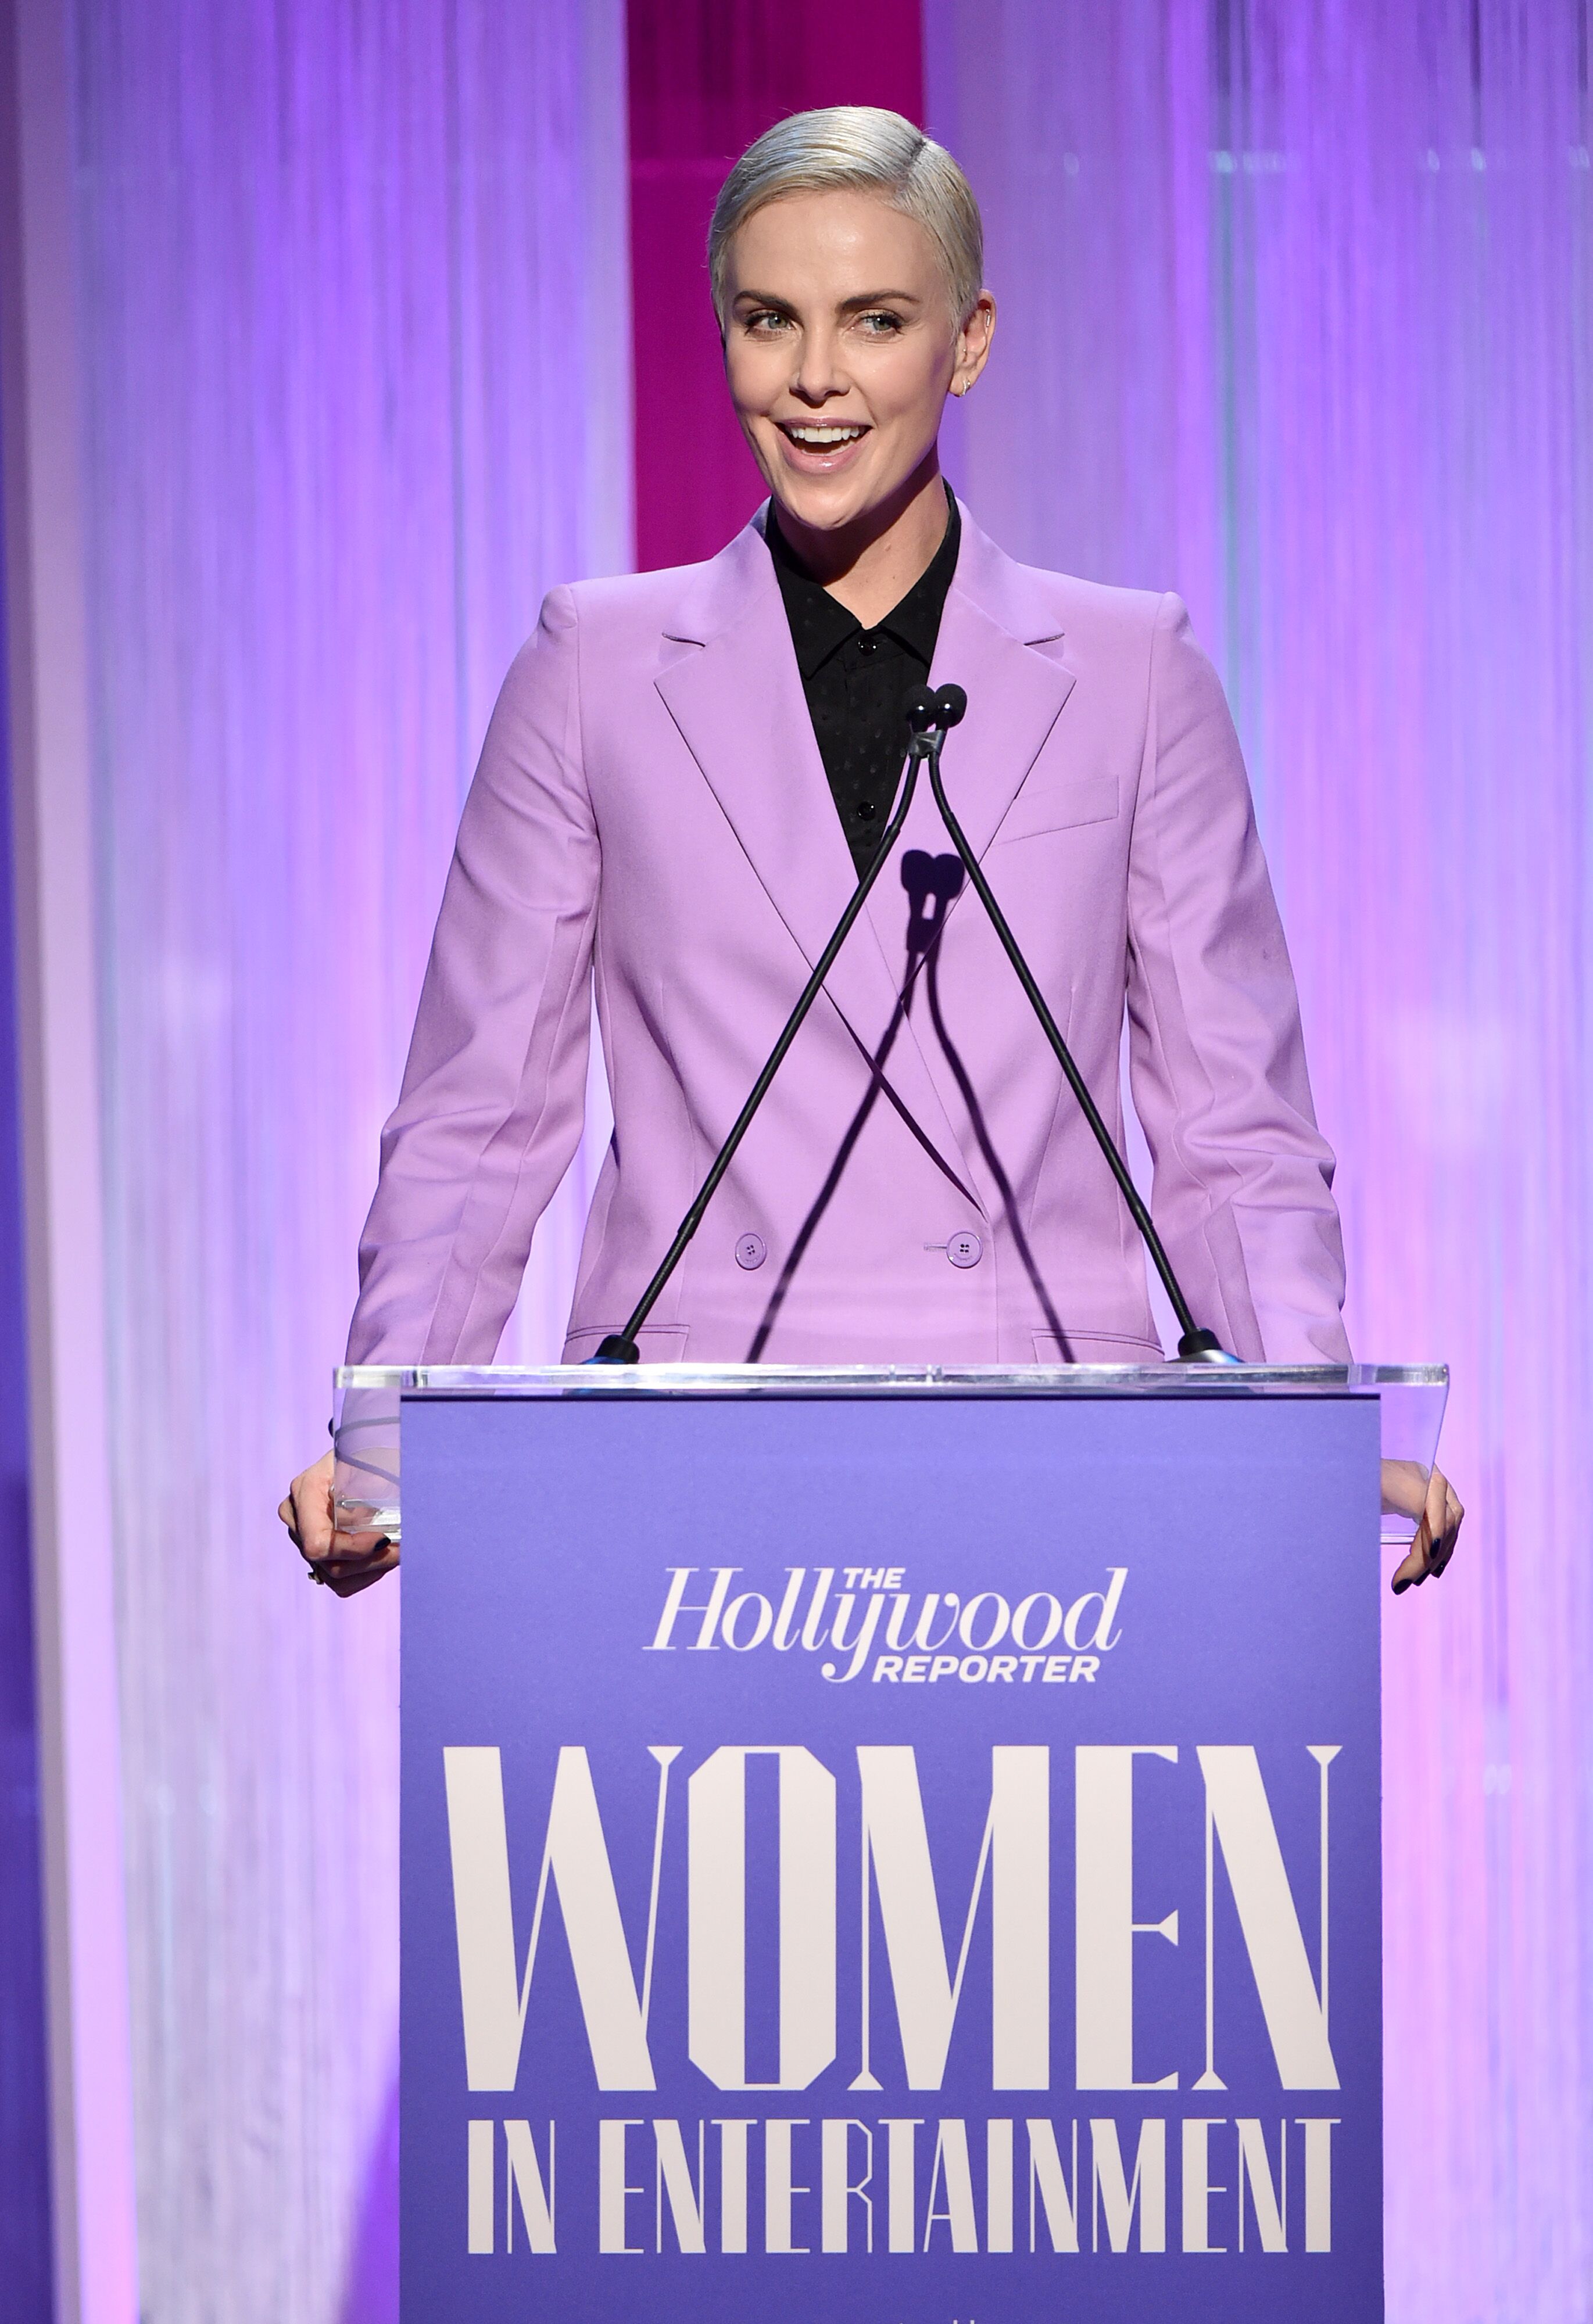 Charlize Theron attends The Hollywood Reporter's Power 100 Women in Entertainment at Milk Studios. | Source: Getty Images